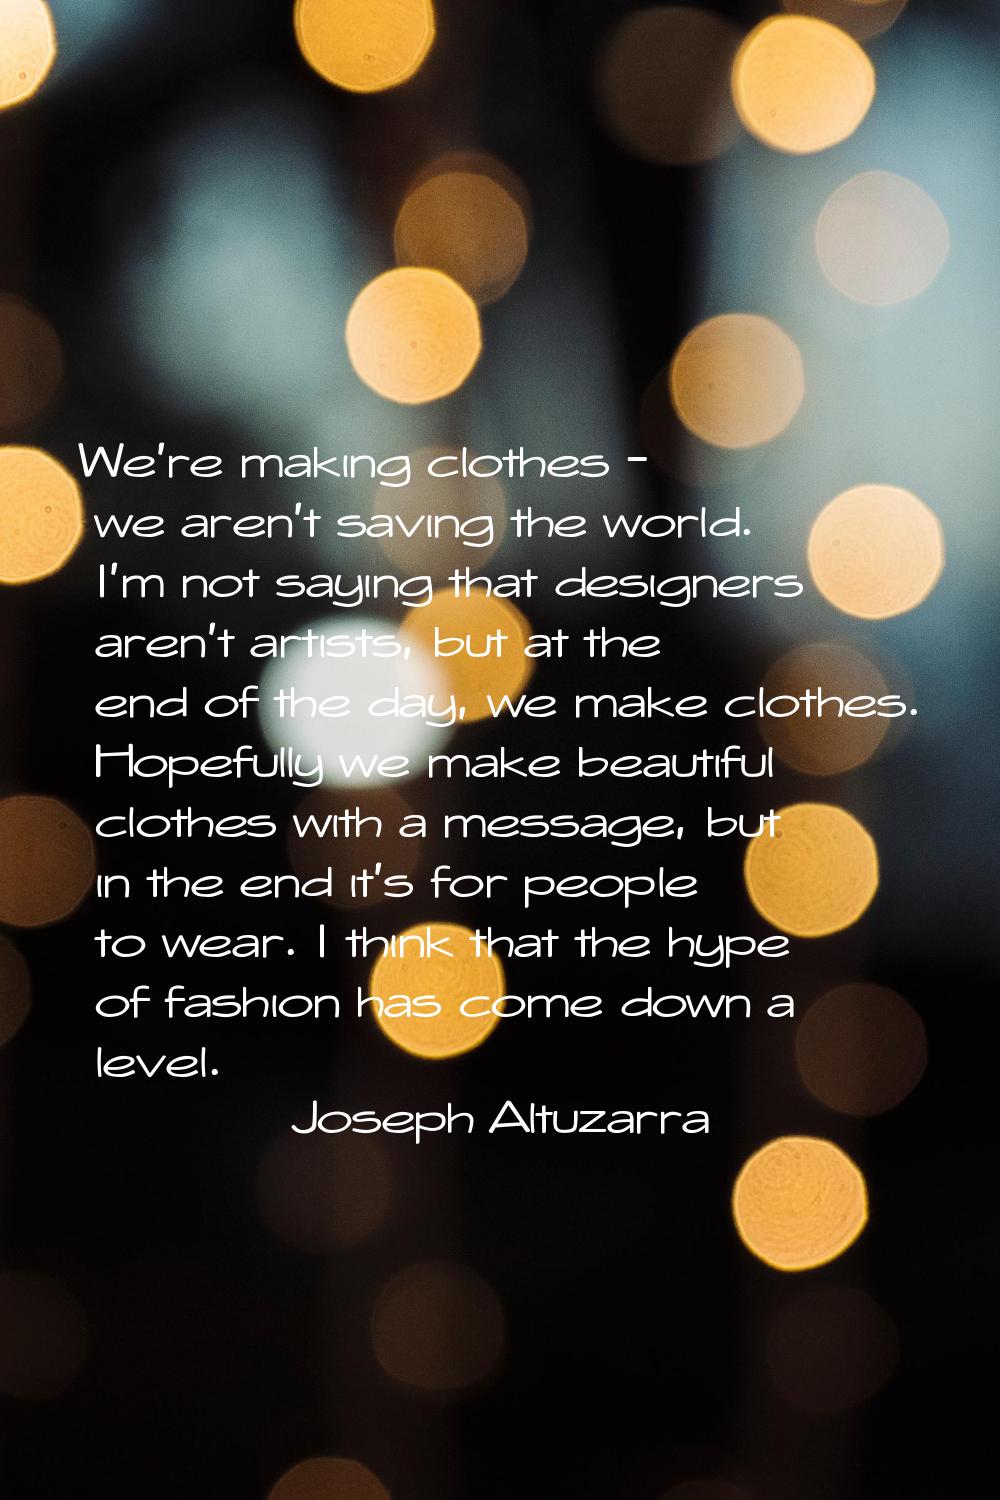 We're making clothes - we aren't saving the world. I'm not saying that designers aren't artists, bu